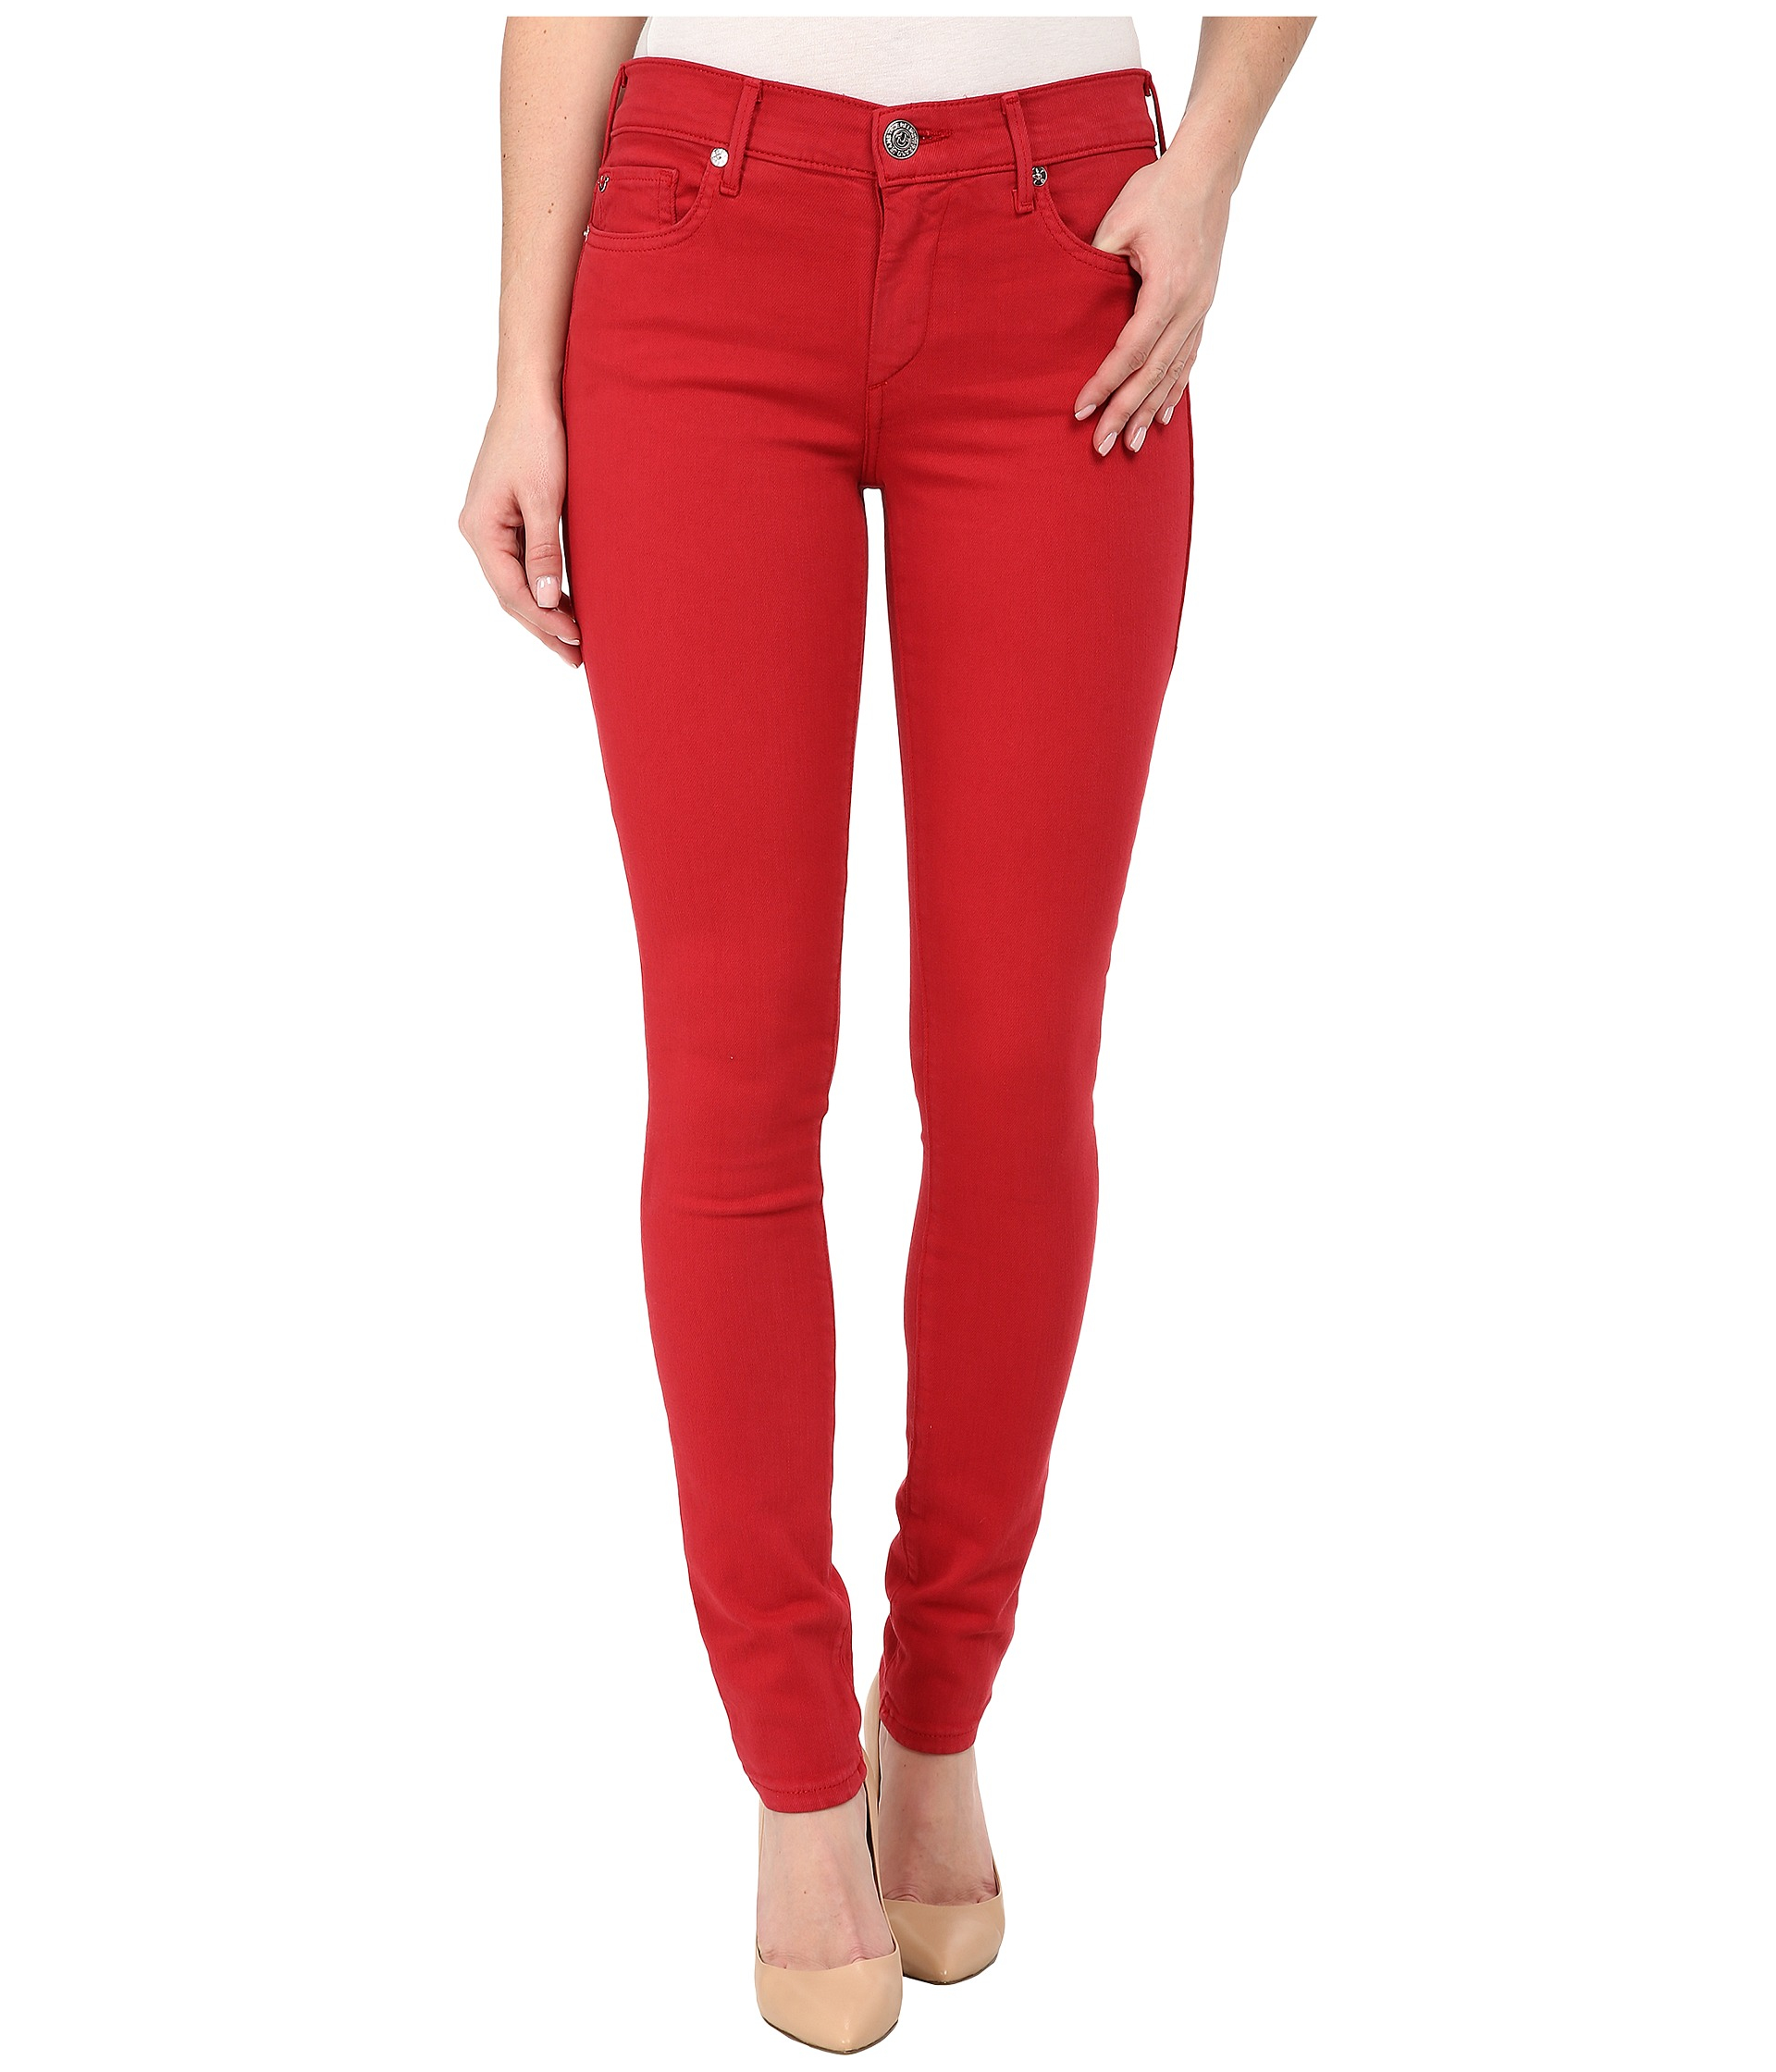 Lyst - True Religion Halle Skinny Jeans In Chili Pepper Red in Red